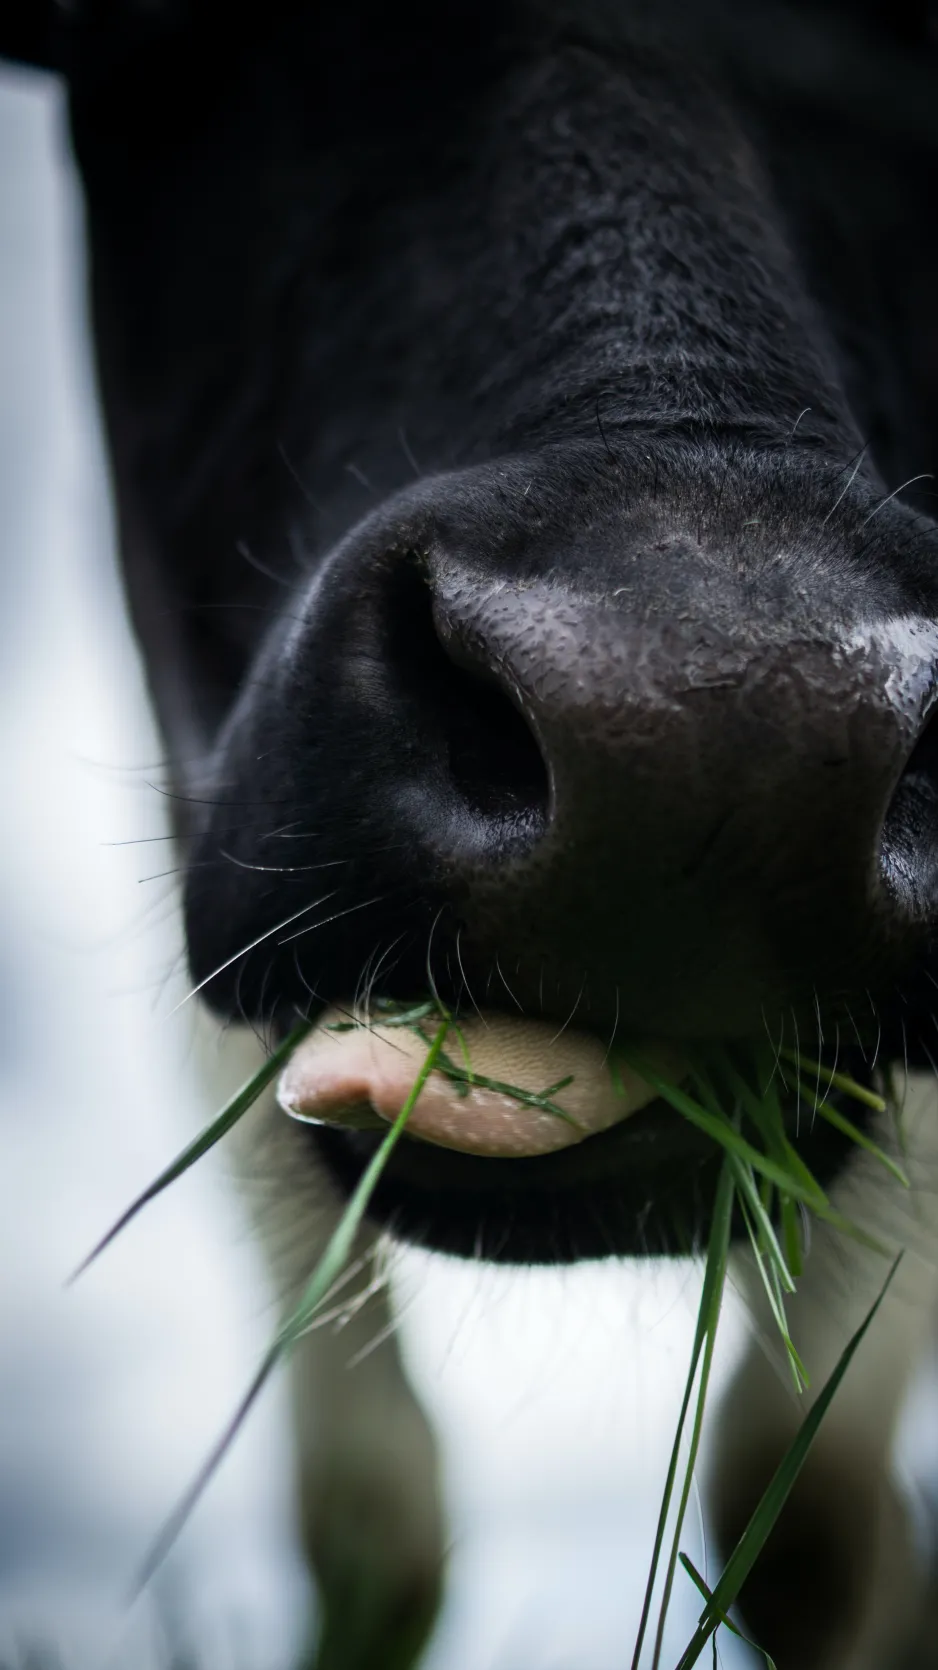 A close-up image of a black cow’s mouth, filled with fresh grass.